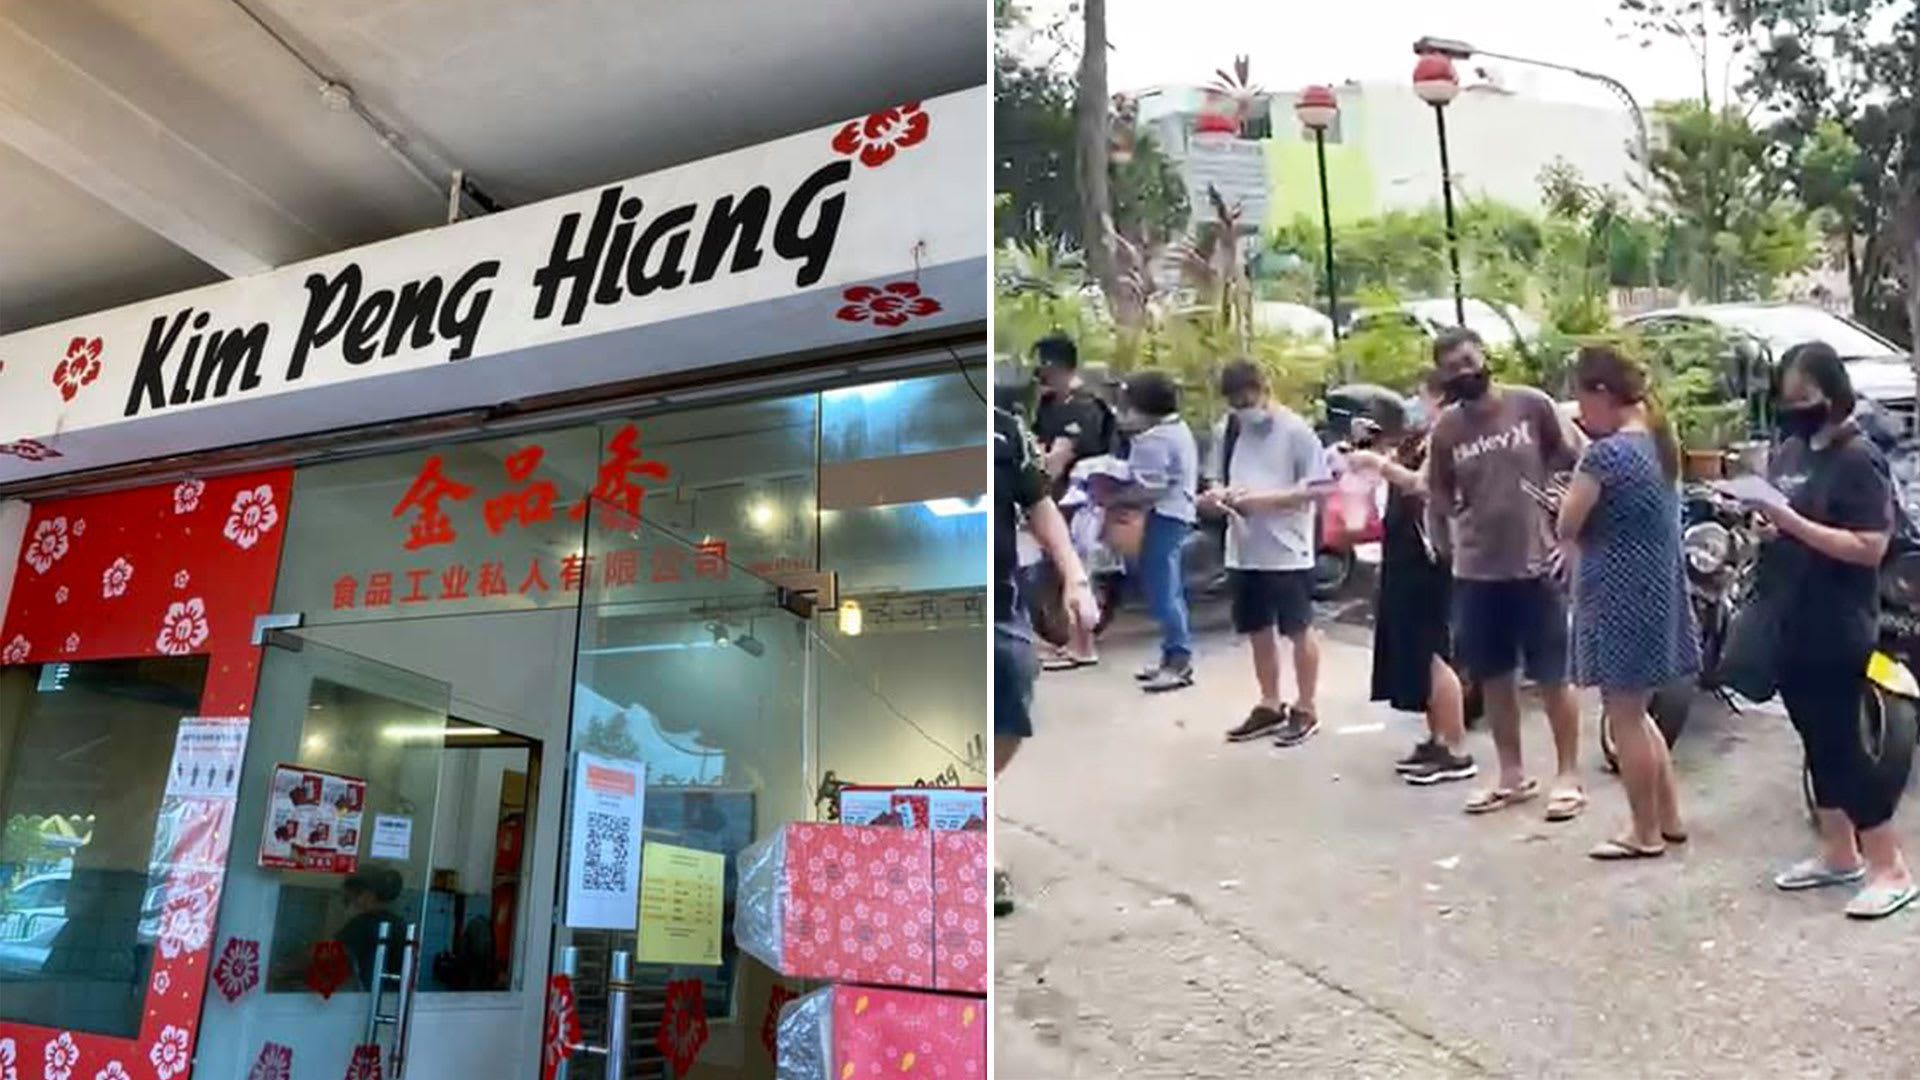 Shorter Queue For Kim Peng Hiang Bak Kwa, But Pay & Collect On Separate Days